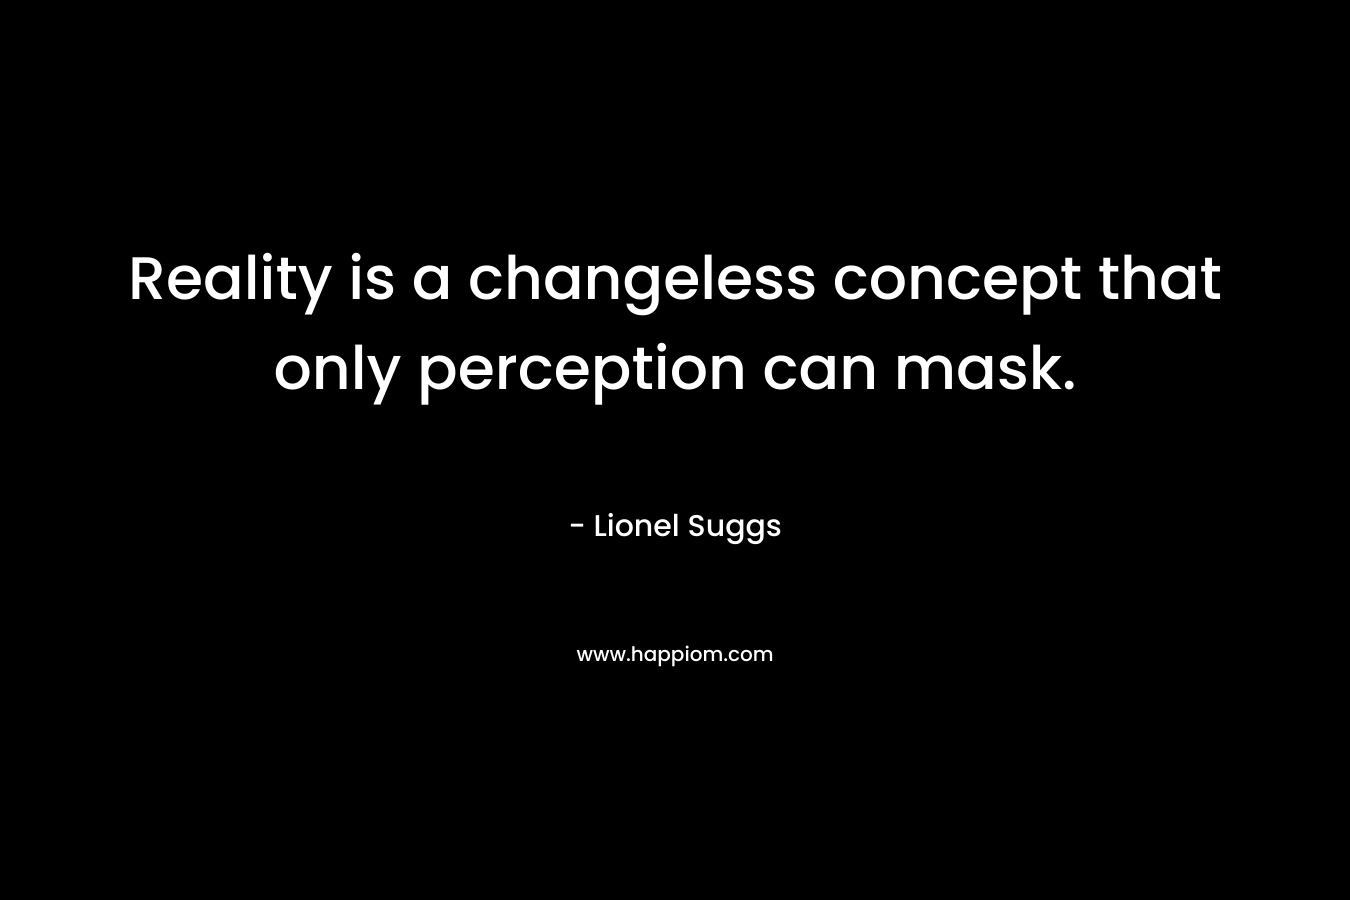 Reality is a changeless concept that only perception can mask.